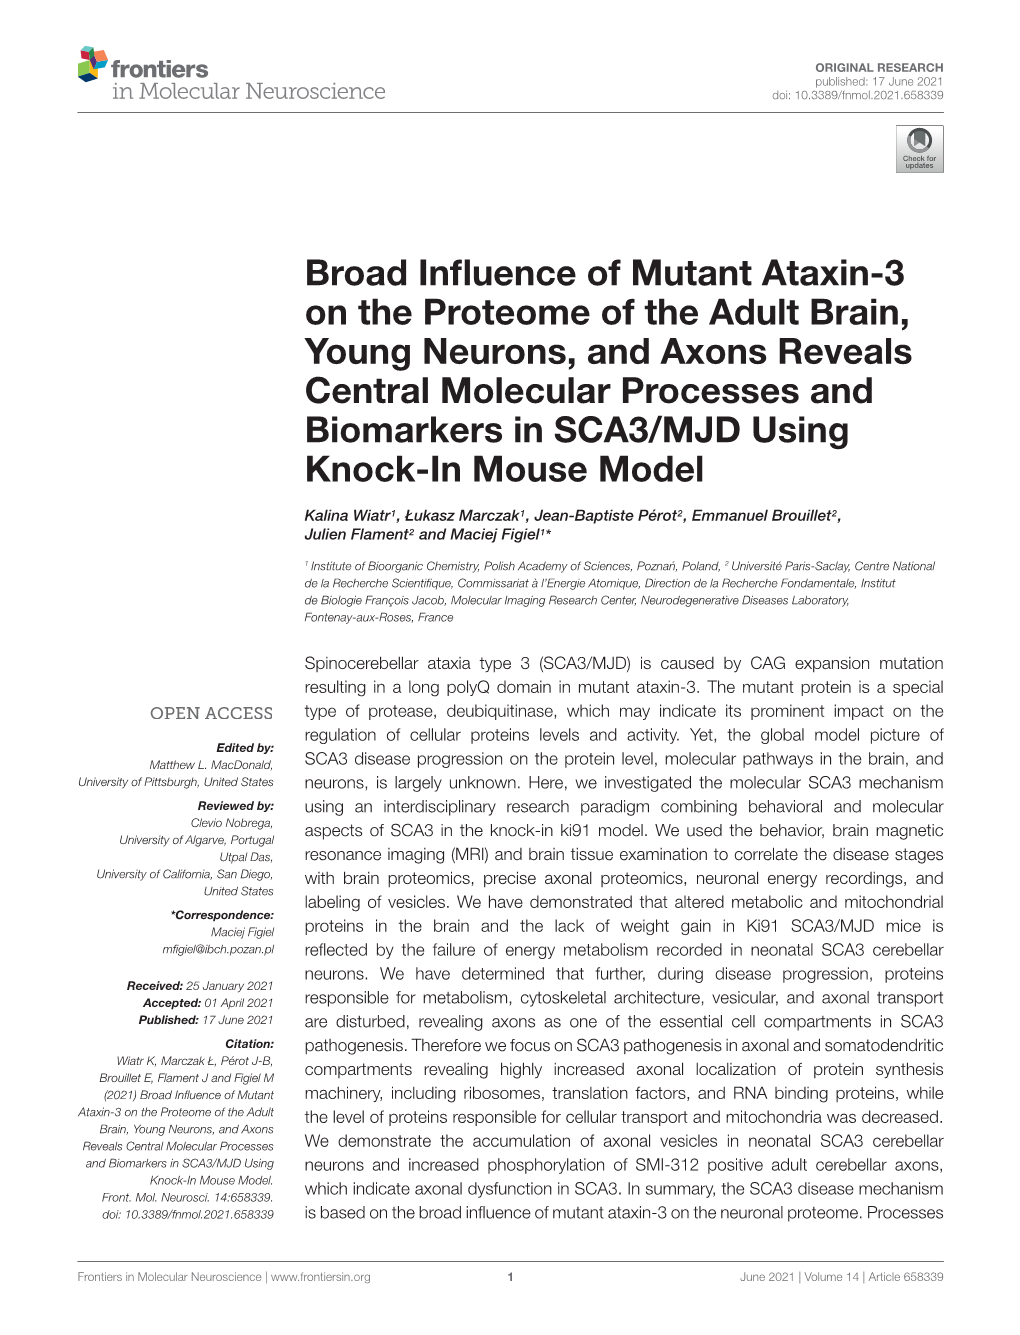 Broad Influence of Mutant Ataxin-3 on the Proteome of the Adult Brain, Young Neurons, and Axons Reveals Central Molecular Proces